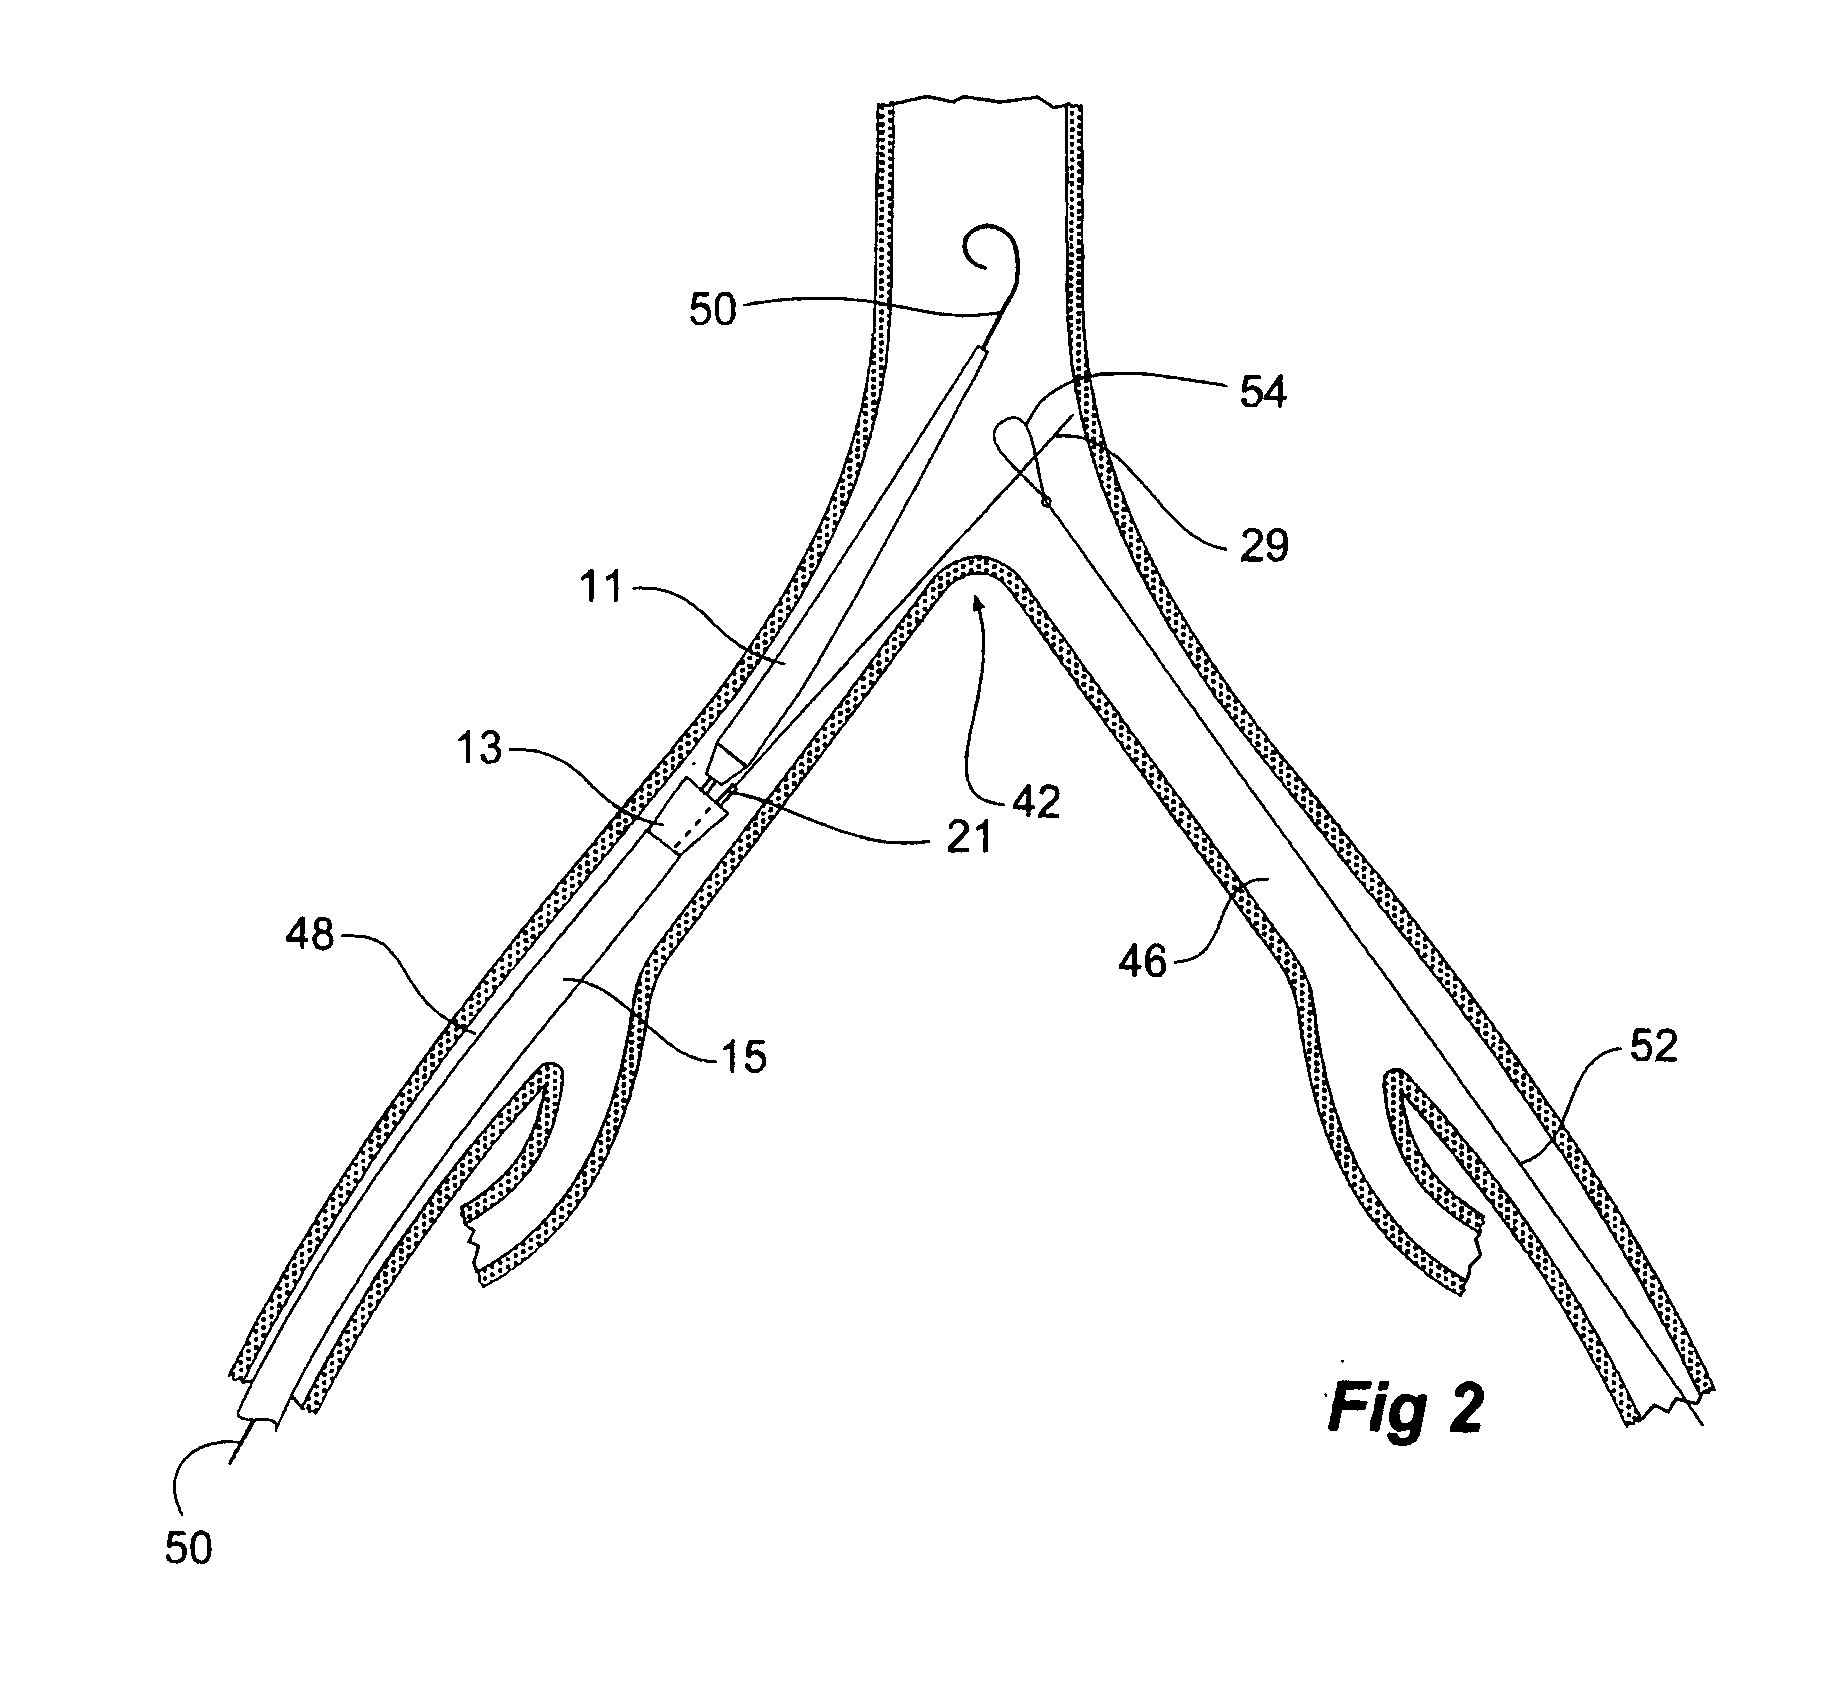 Introducer for a side branch device